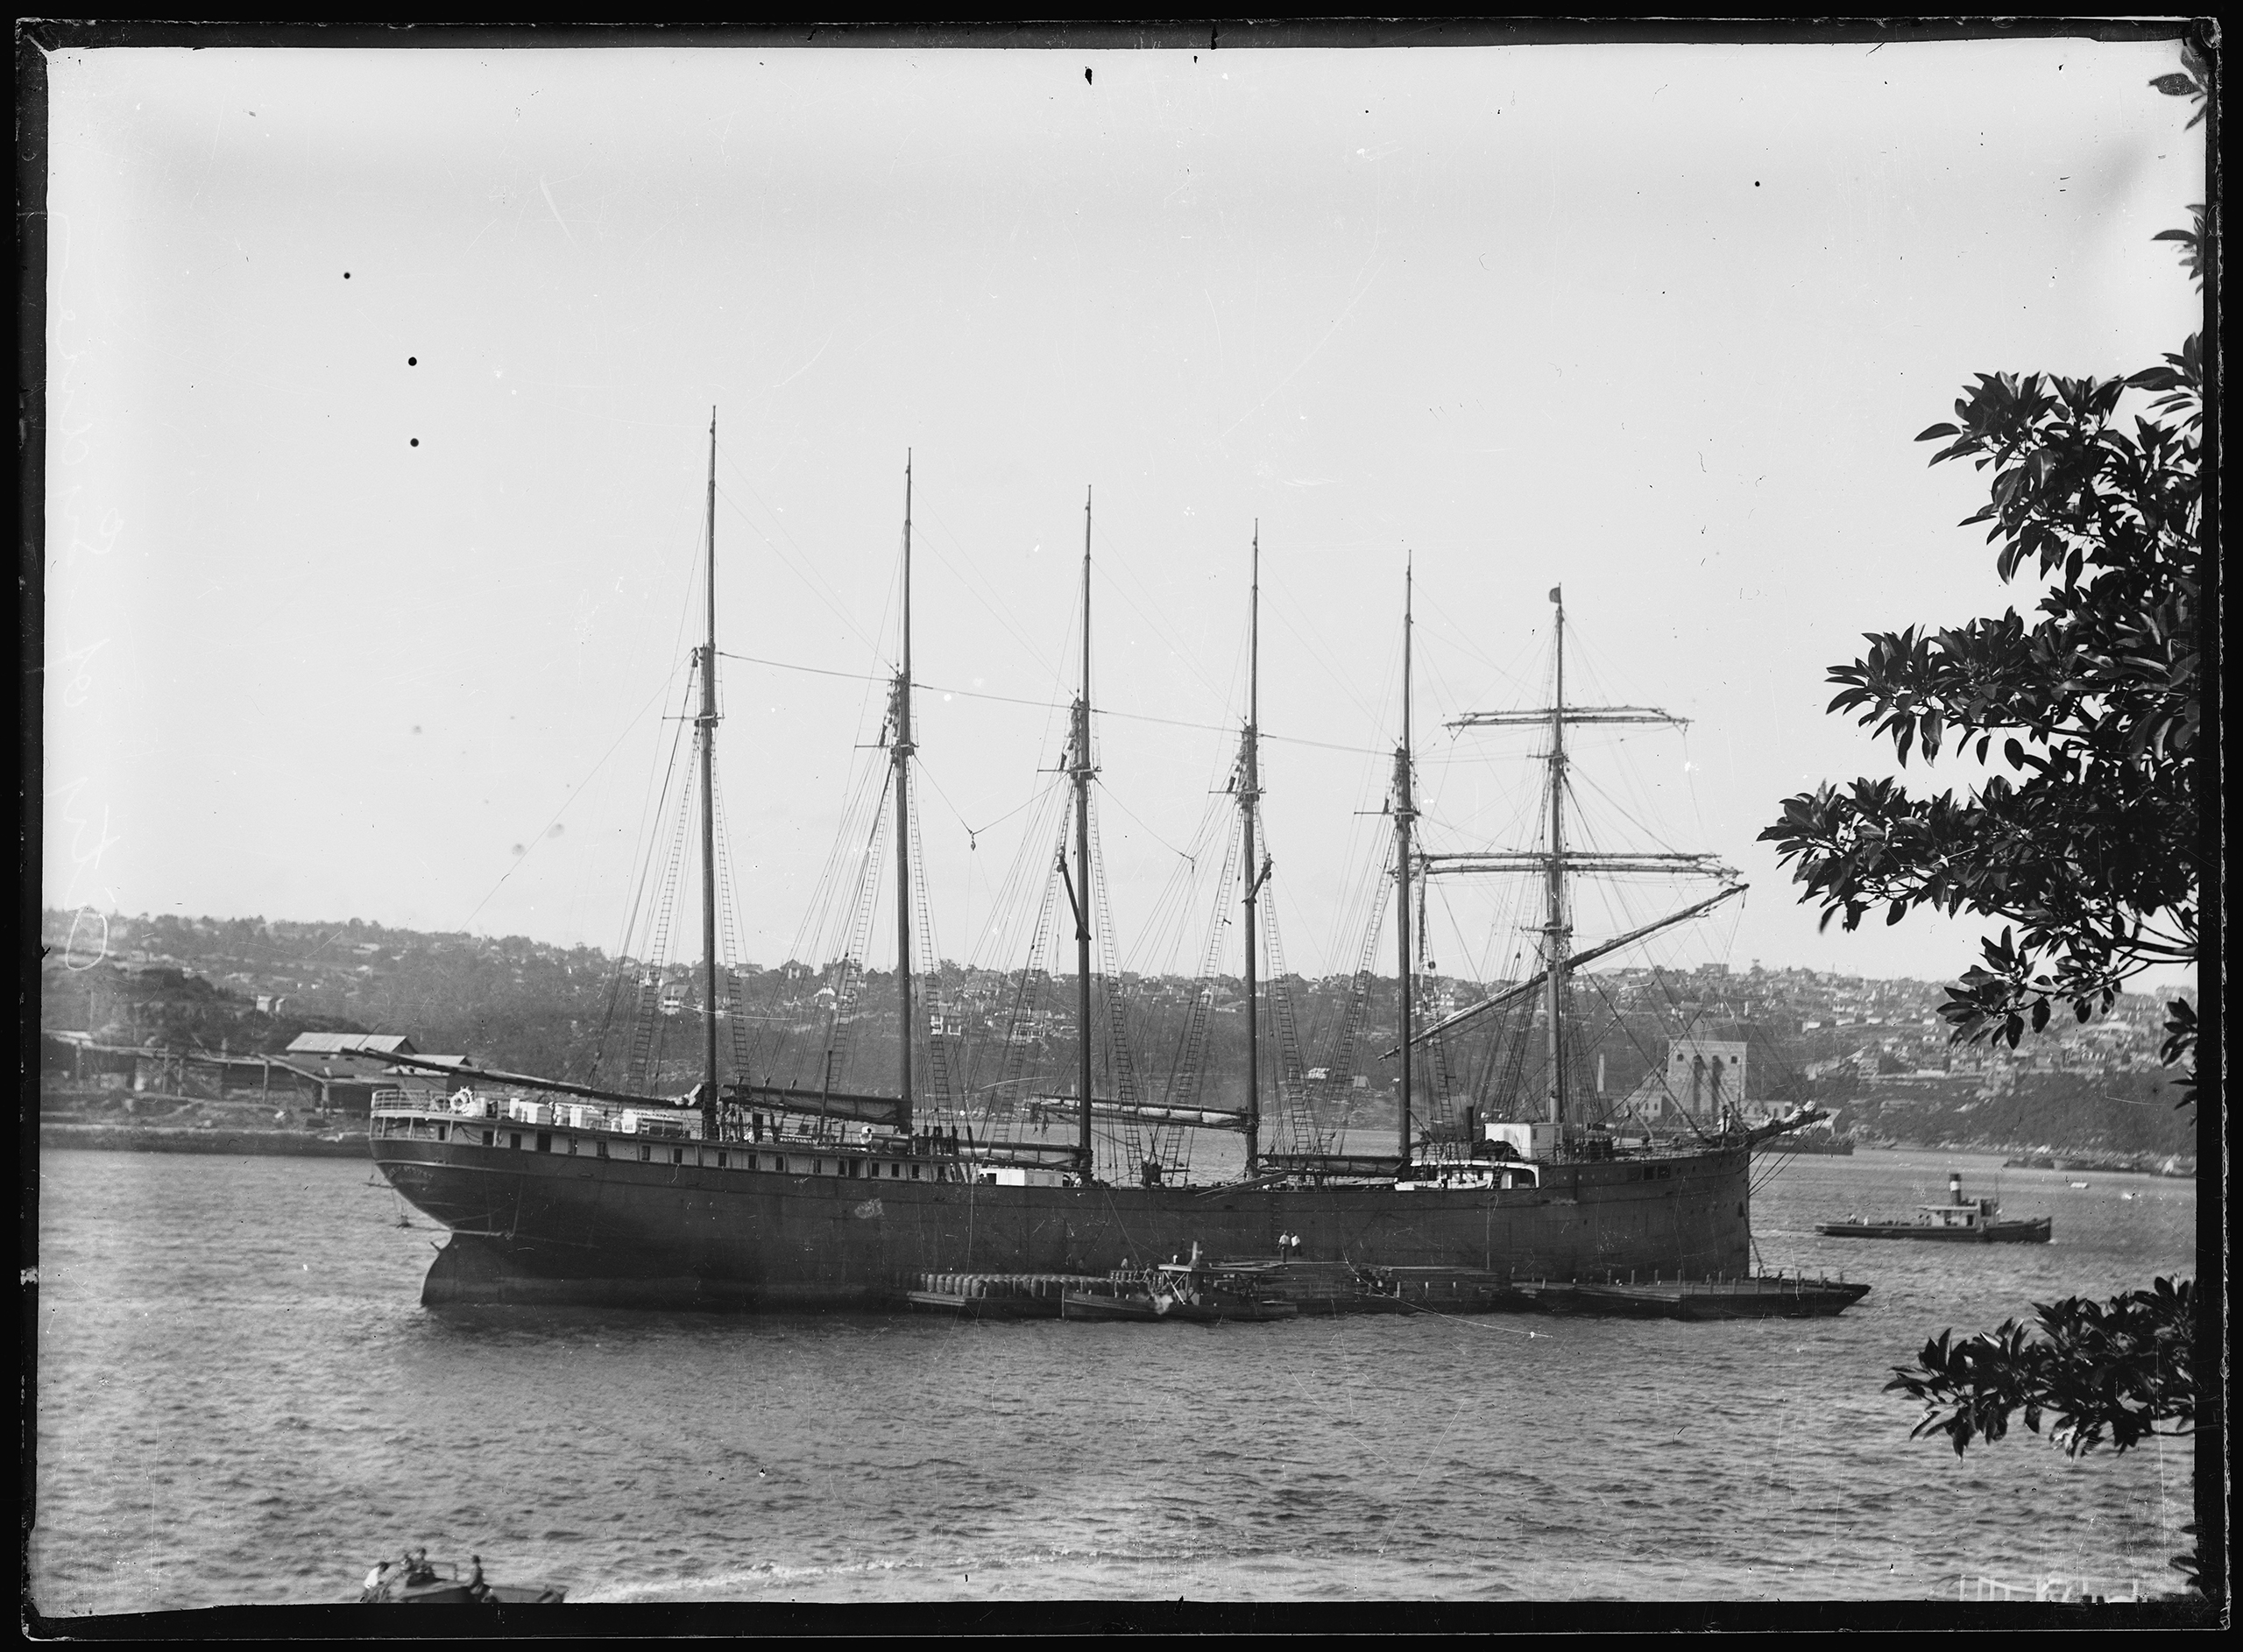 Glass plate negative of the 'City of Sydney' from the Tyrrell Collection